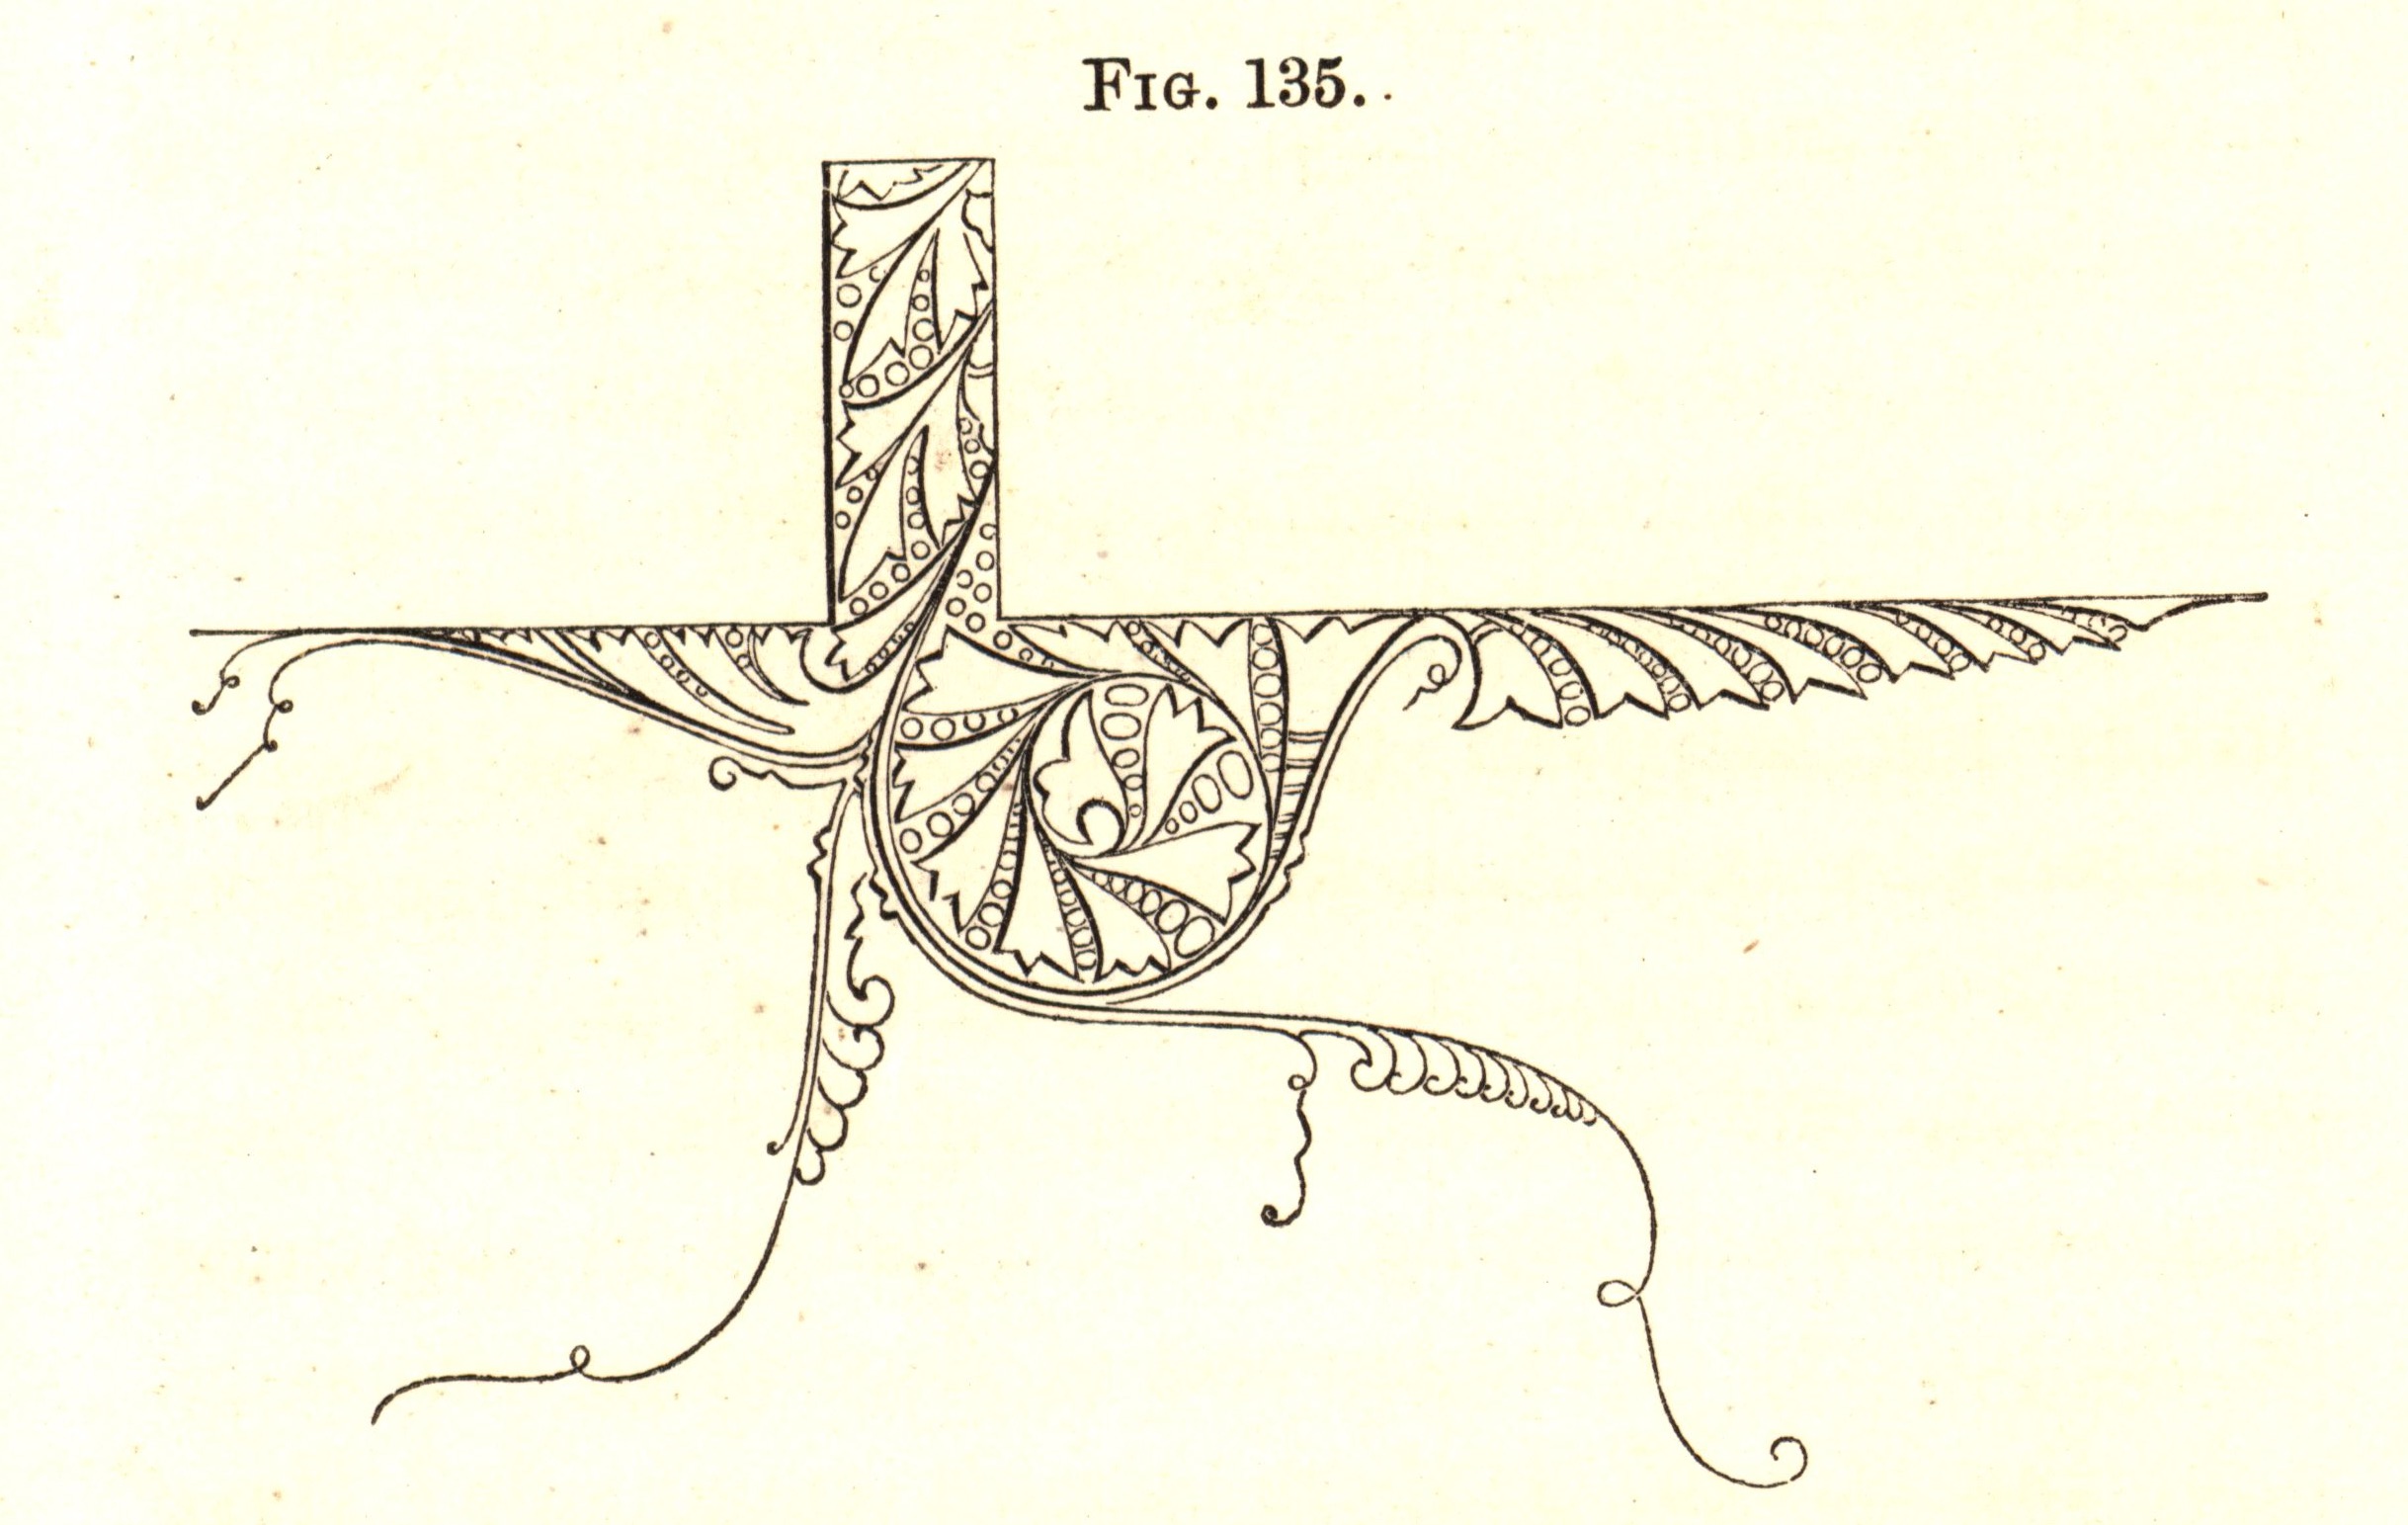 Figure 11. Dresser, an ornament that “may justly be said to embody two natural facts” about water’s behavior against a surface, the way it rebounds and the way it clings. Fig. 135 from _The Art of Decorative Design_. Courtesy of the Department of Special Collections, Stanford University Libraries.